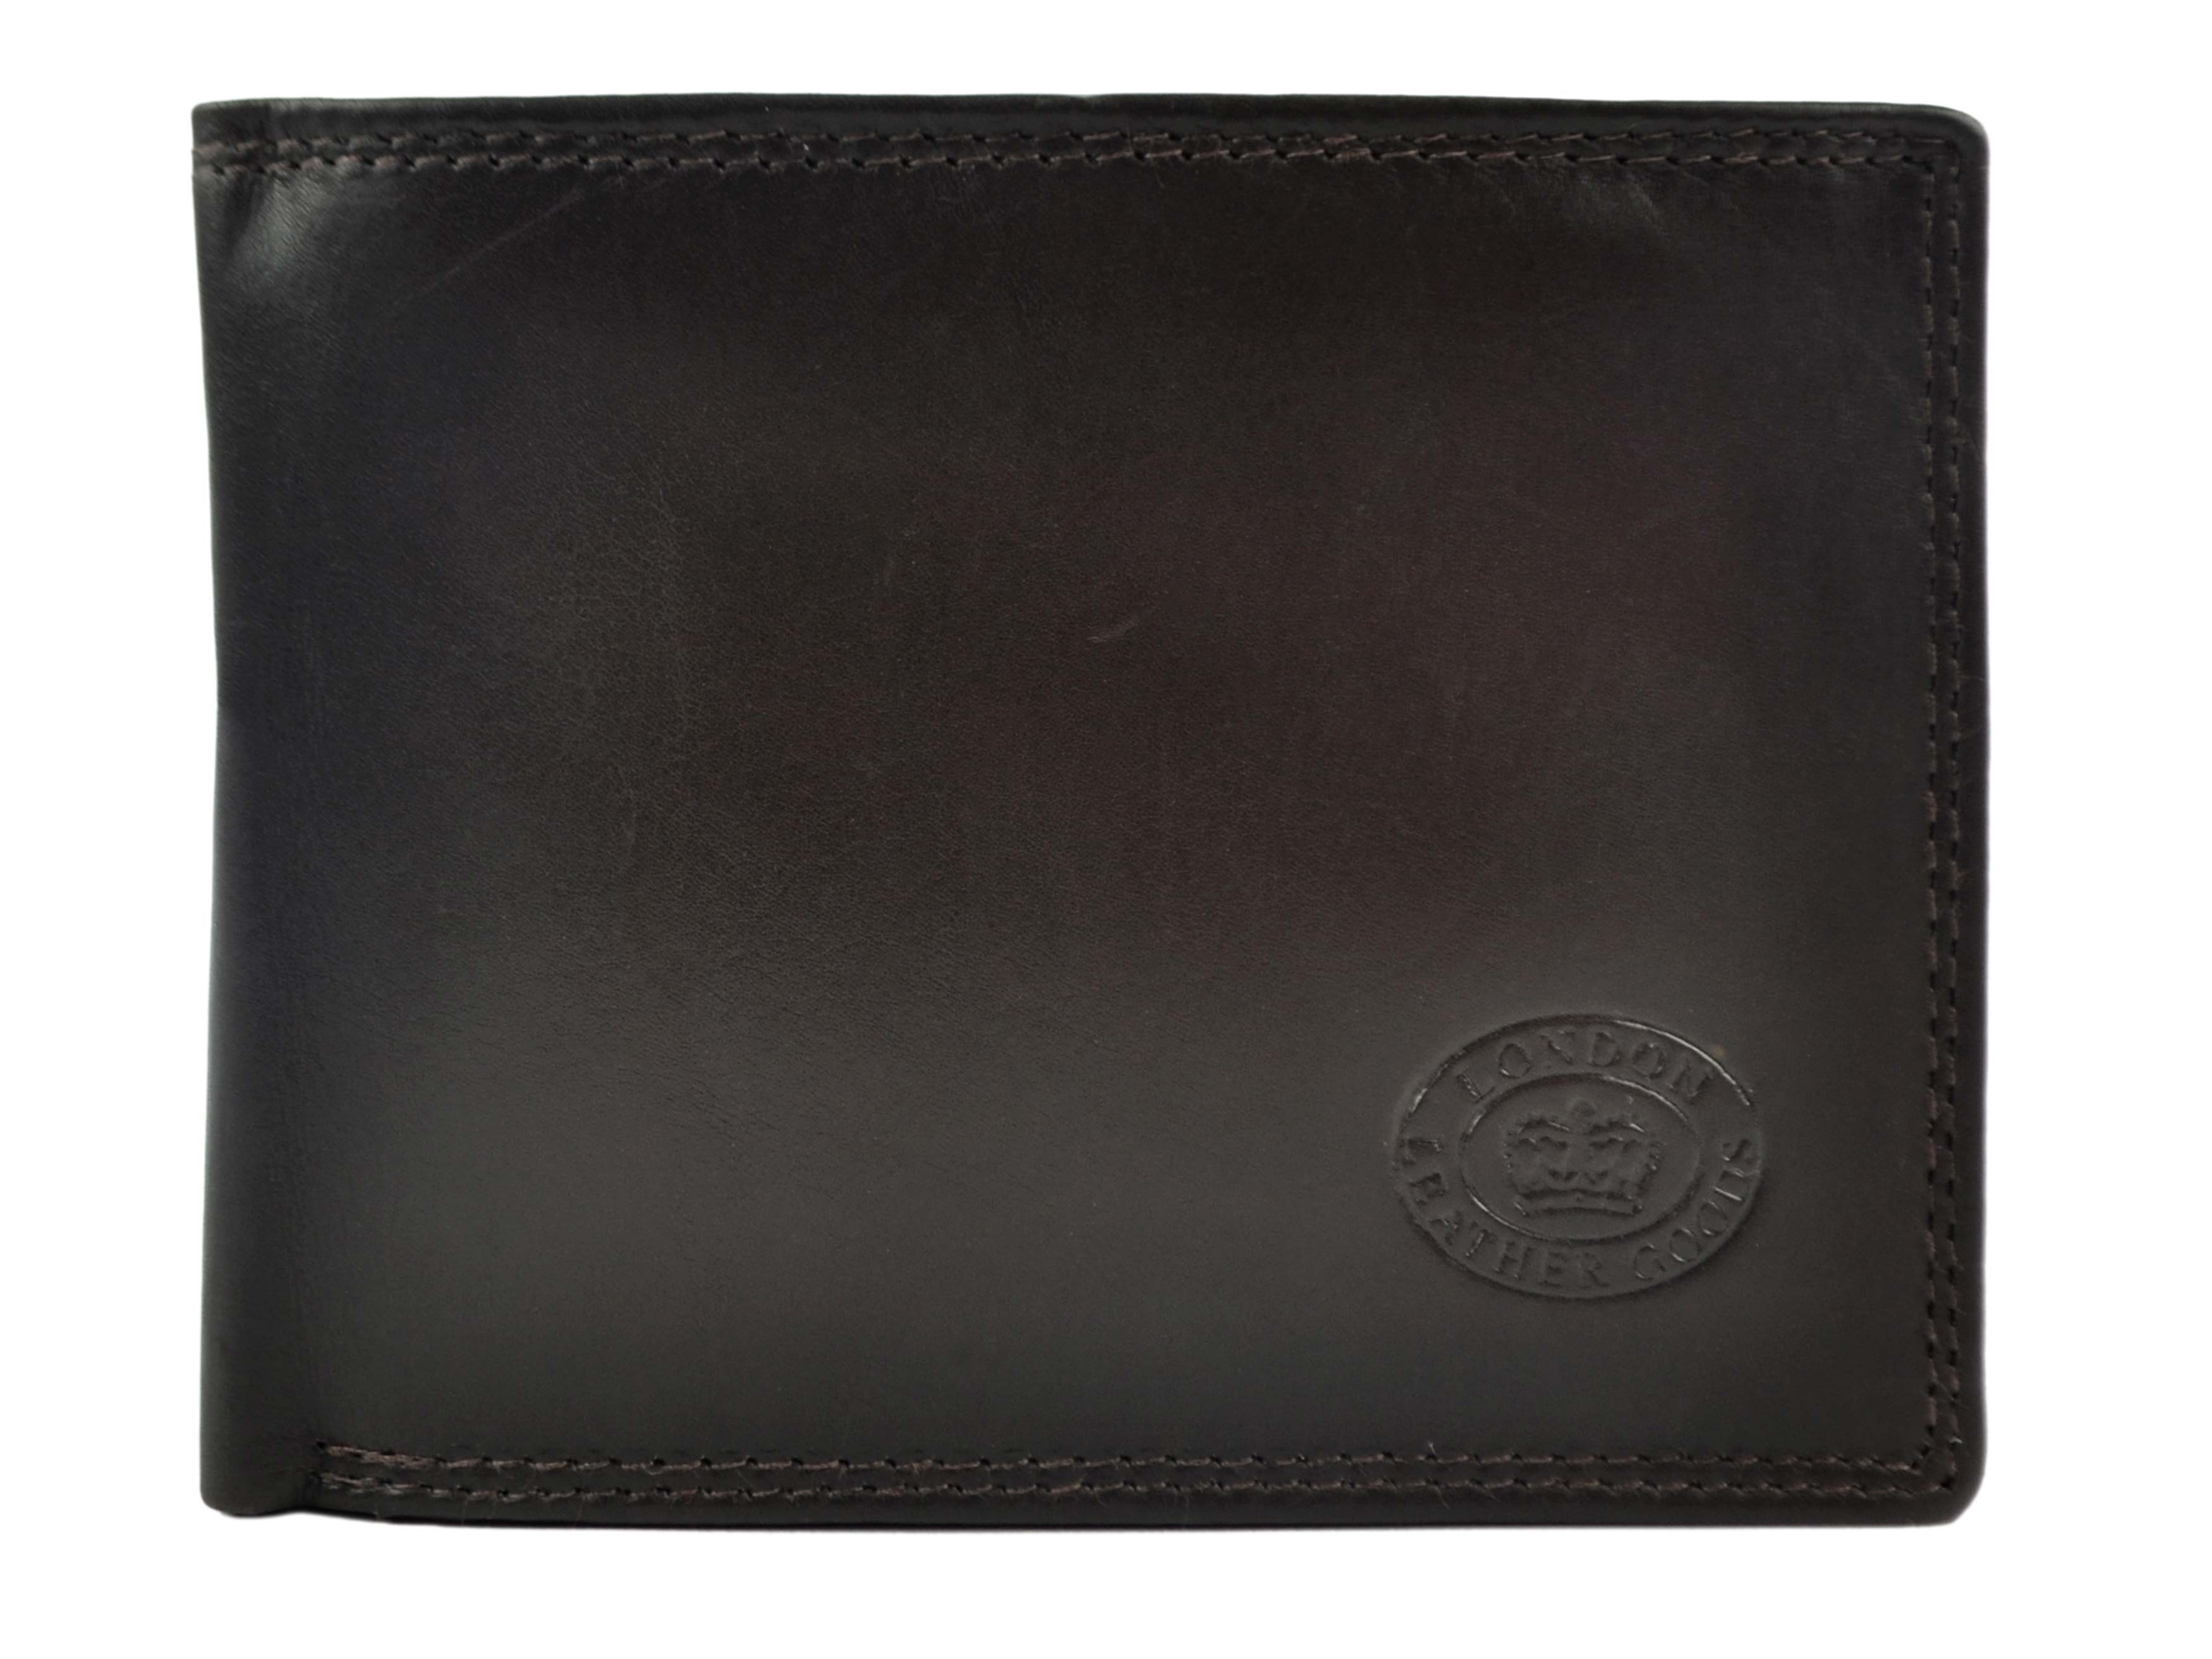 Mens Quality Soft Leather Wallet by London Leather Goods Trifold ...